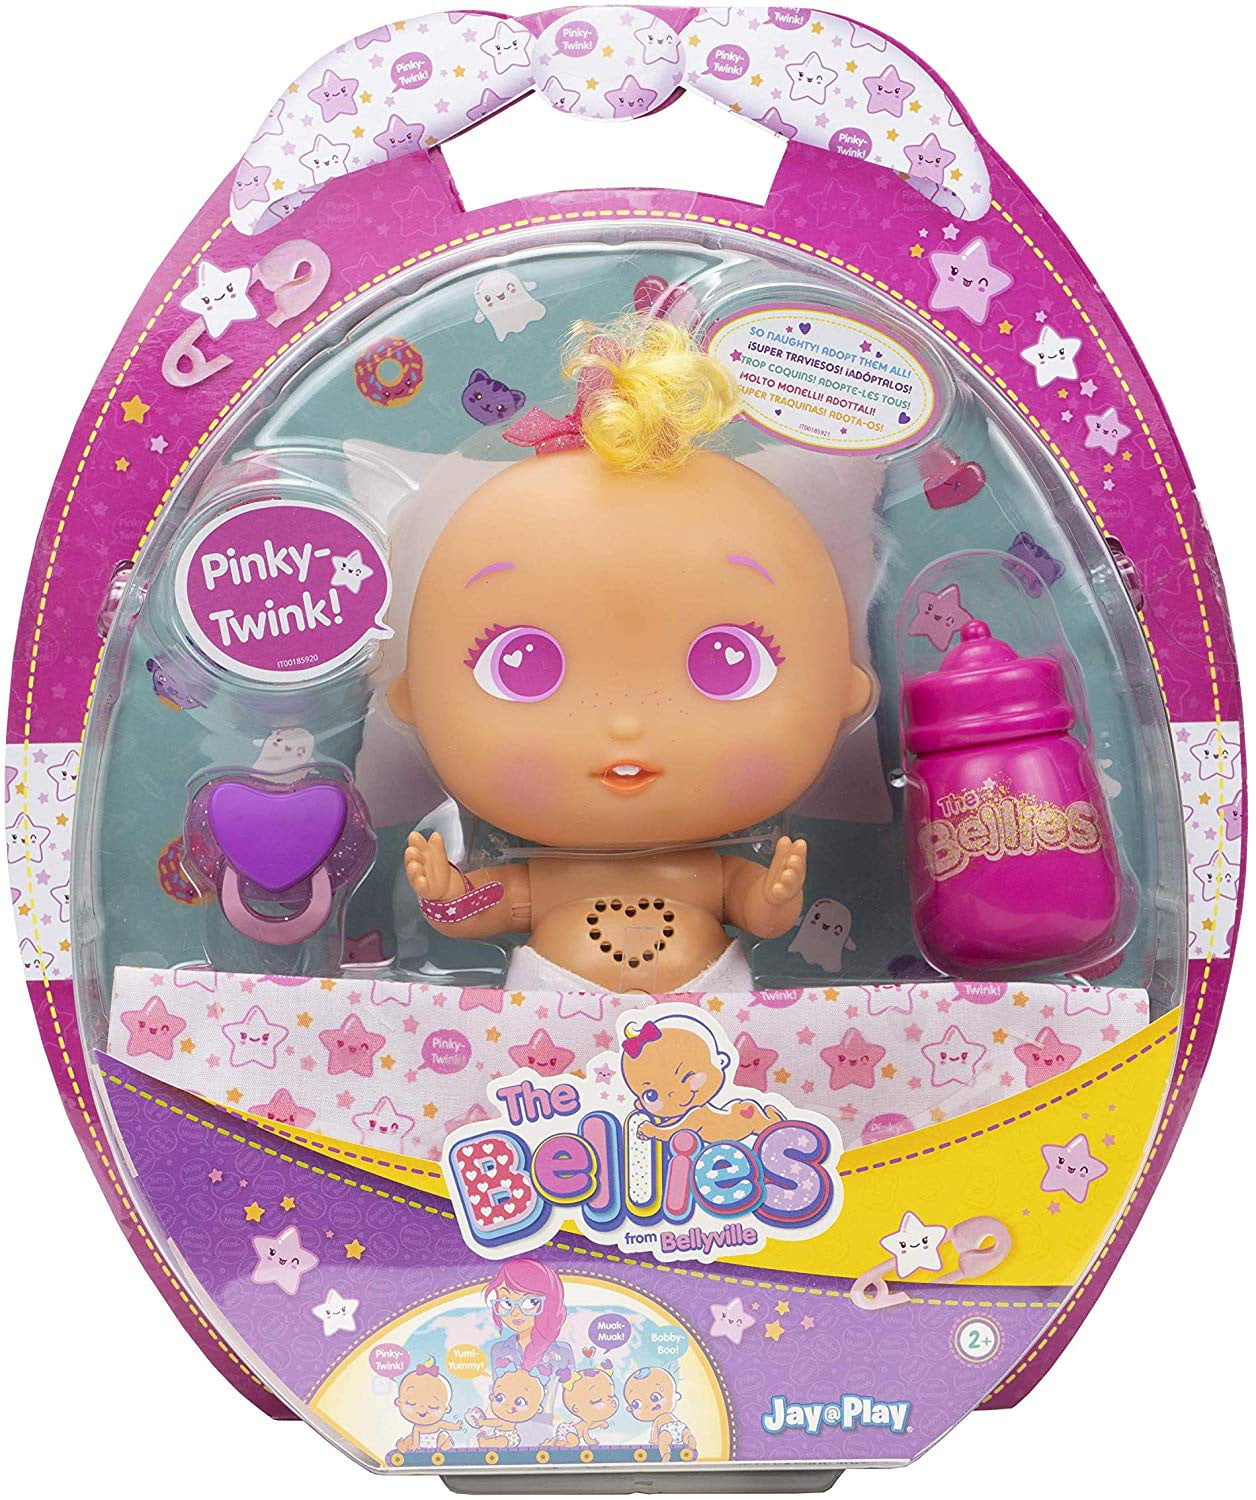 The Bellies Interactive Doll Pinky Twink 